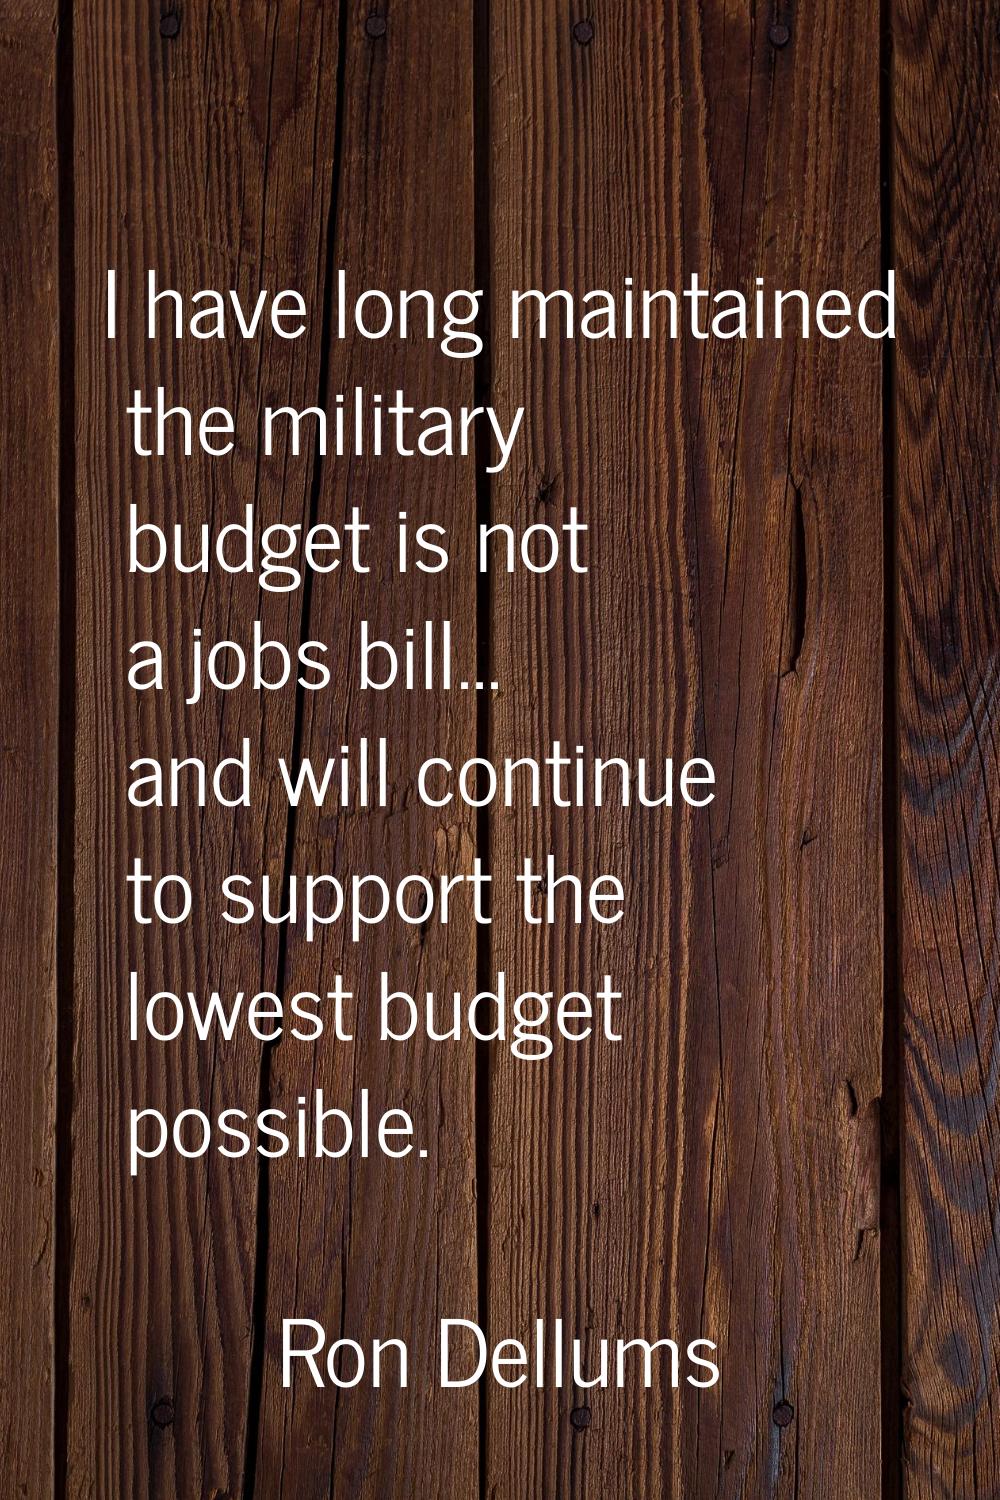 I have long maintained the military budget is not a jobs bill... and will continue to support the l